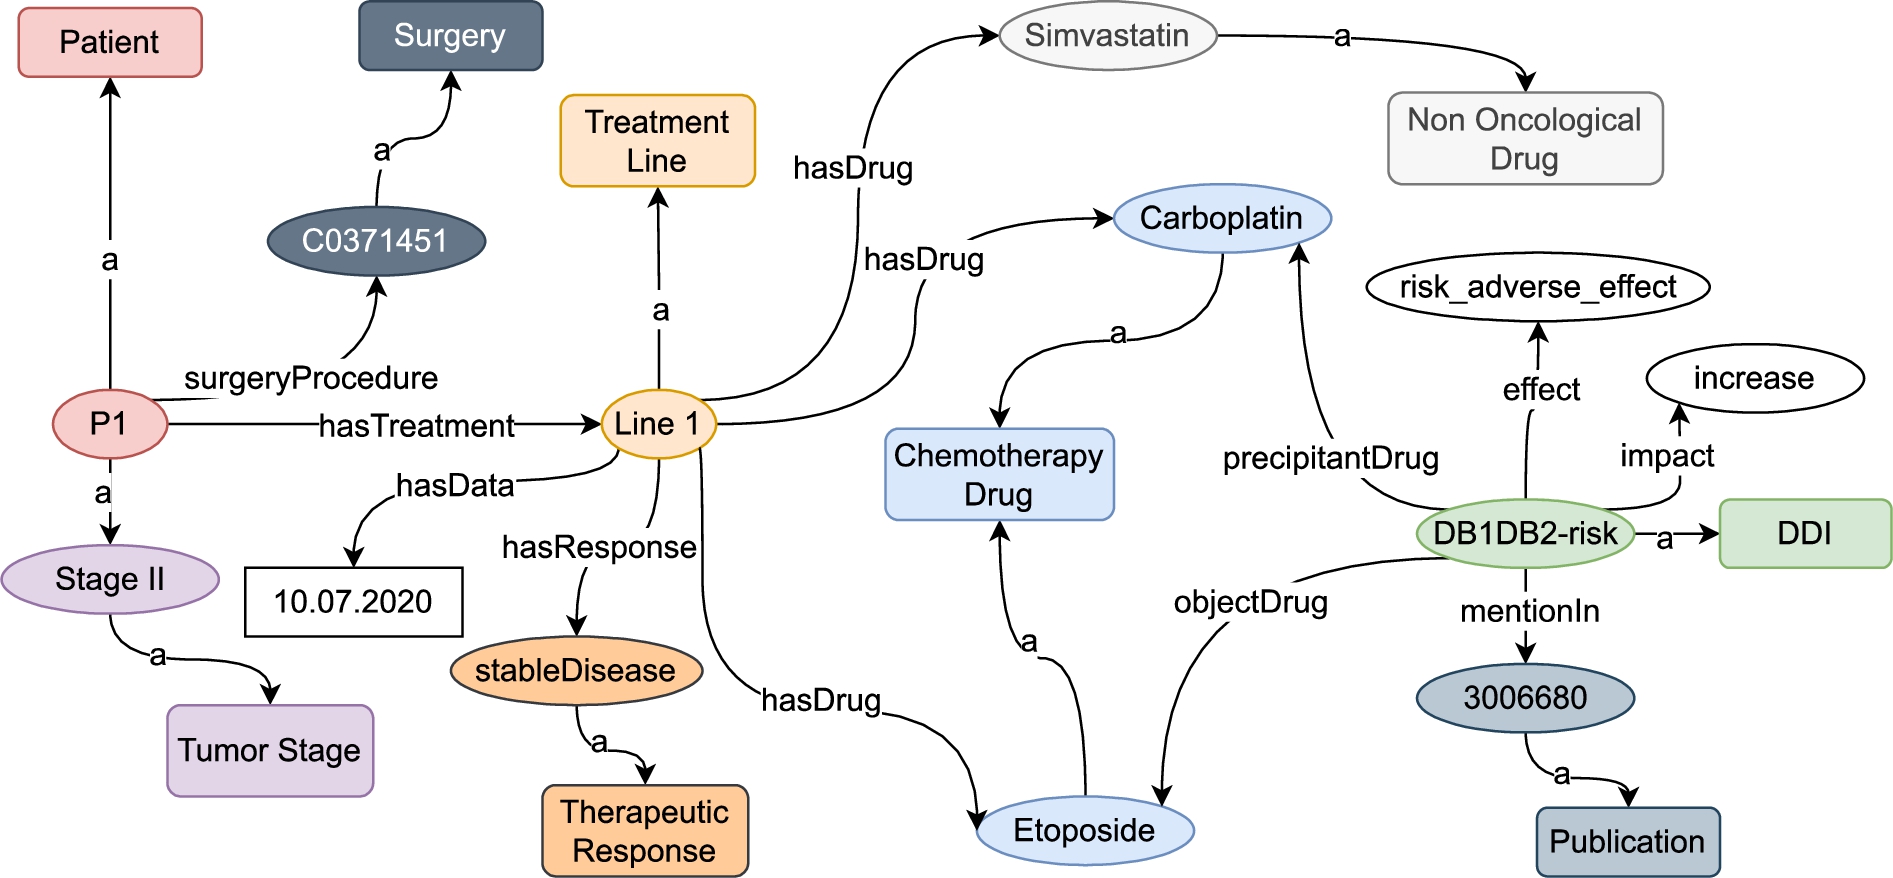 Representation of a patient in the lung cancer knowledge graph.